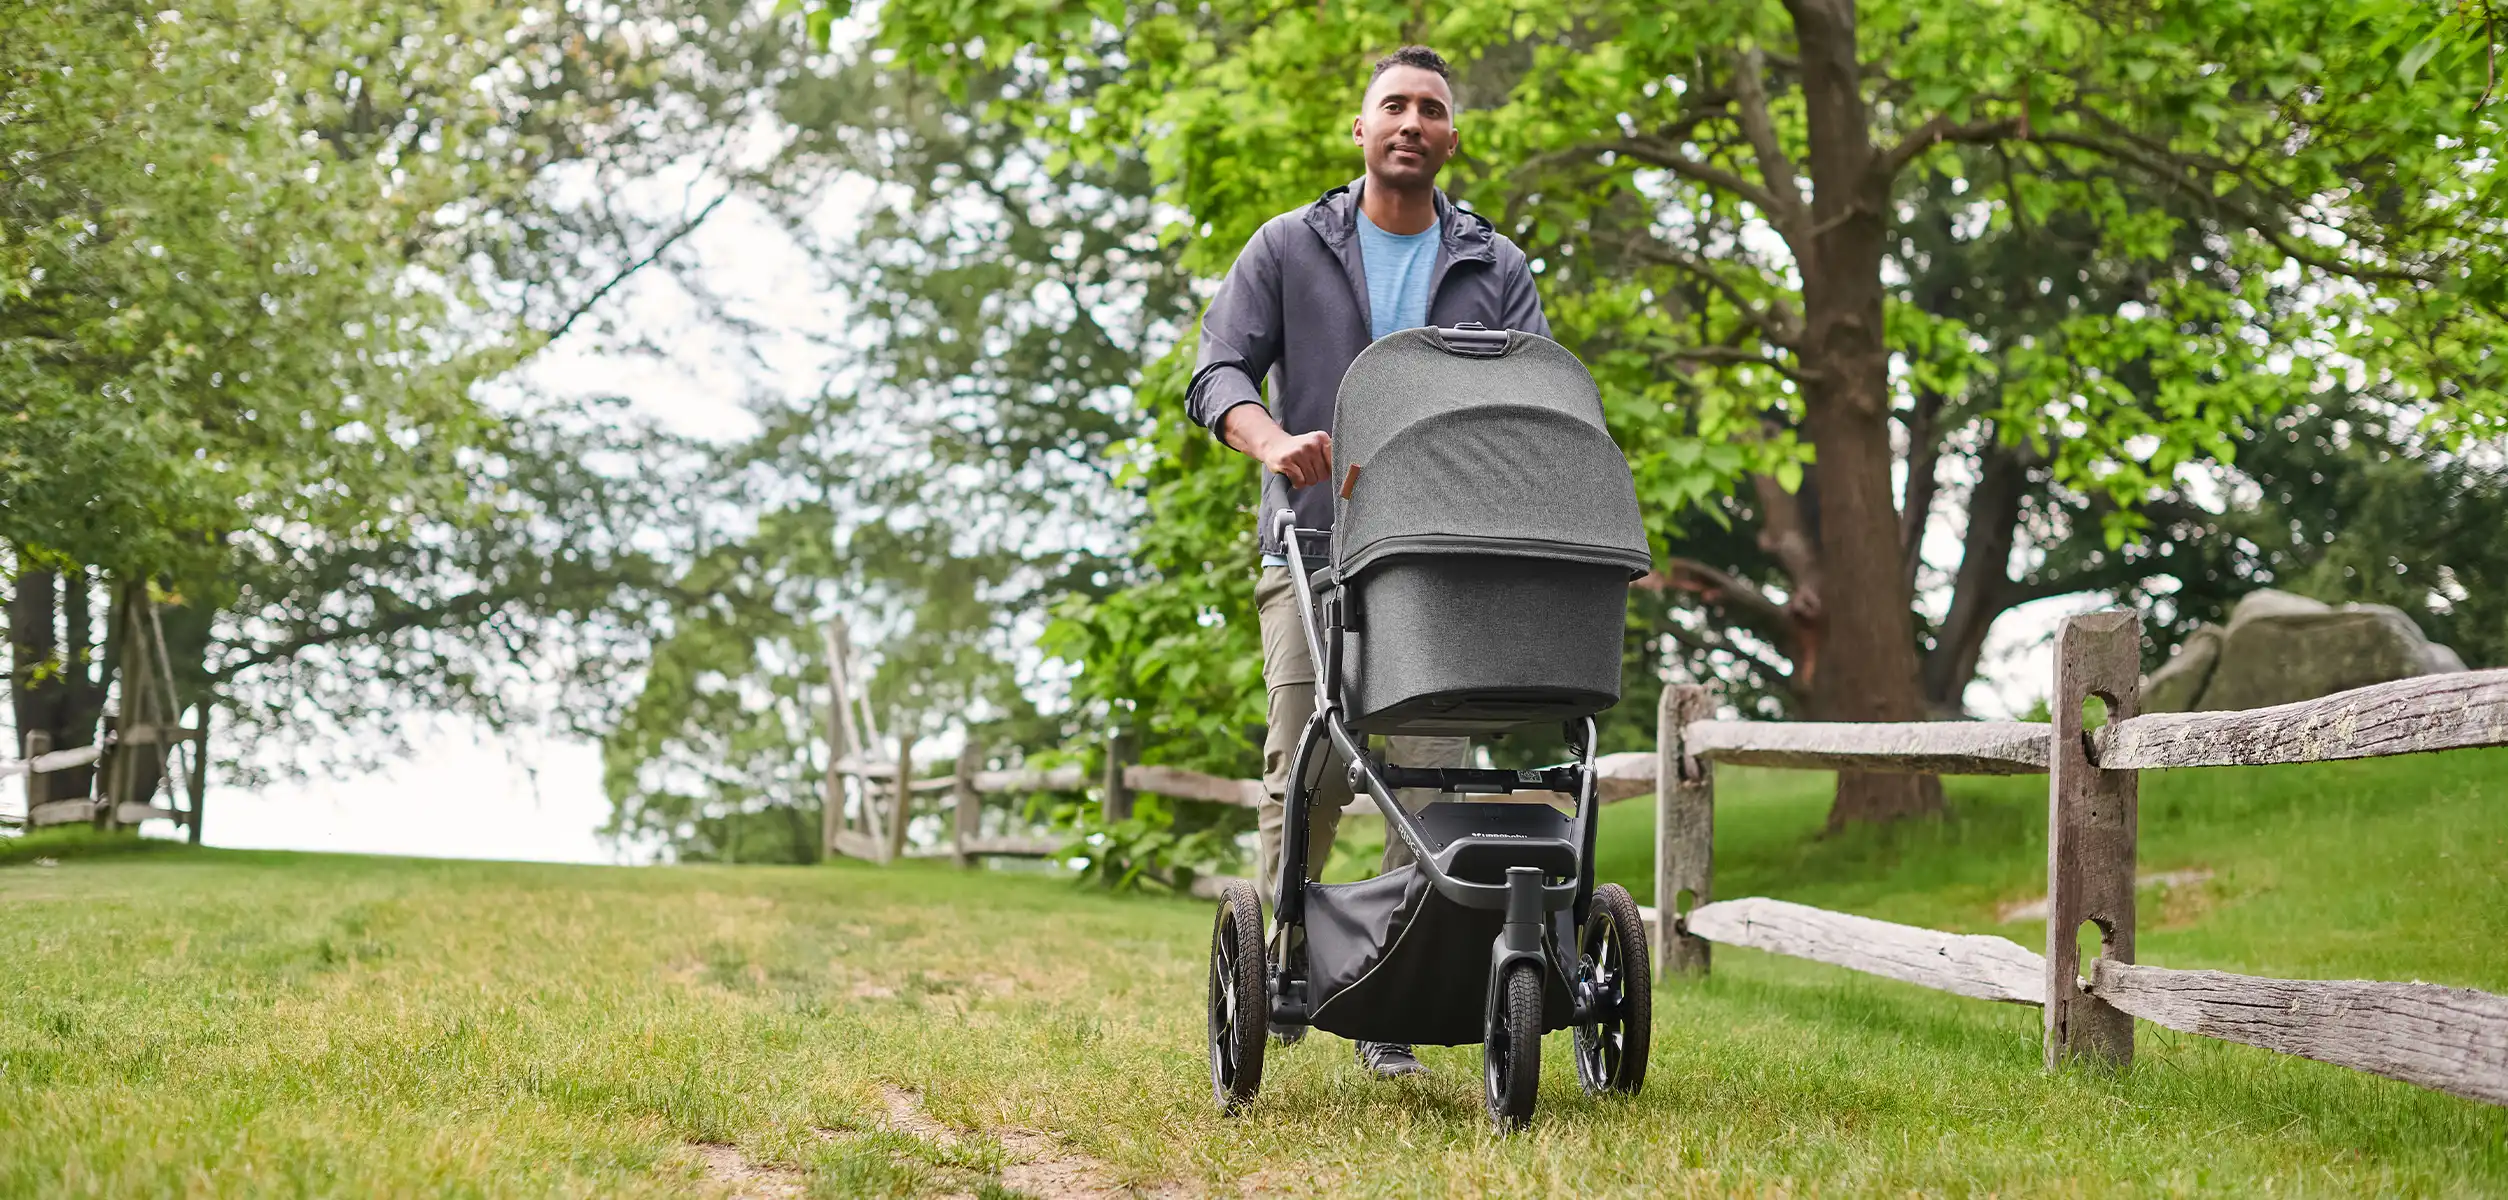 A man comfortably pushes the Ridge stroller through a pasture, using adapters and the Bassinet accessory to convert the stroller to a from-birth option